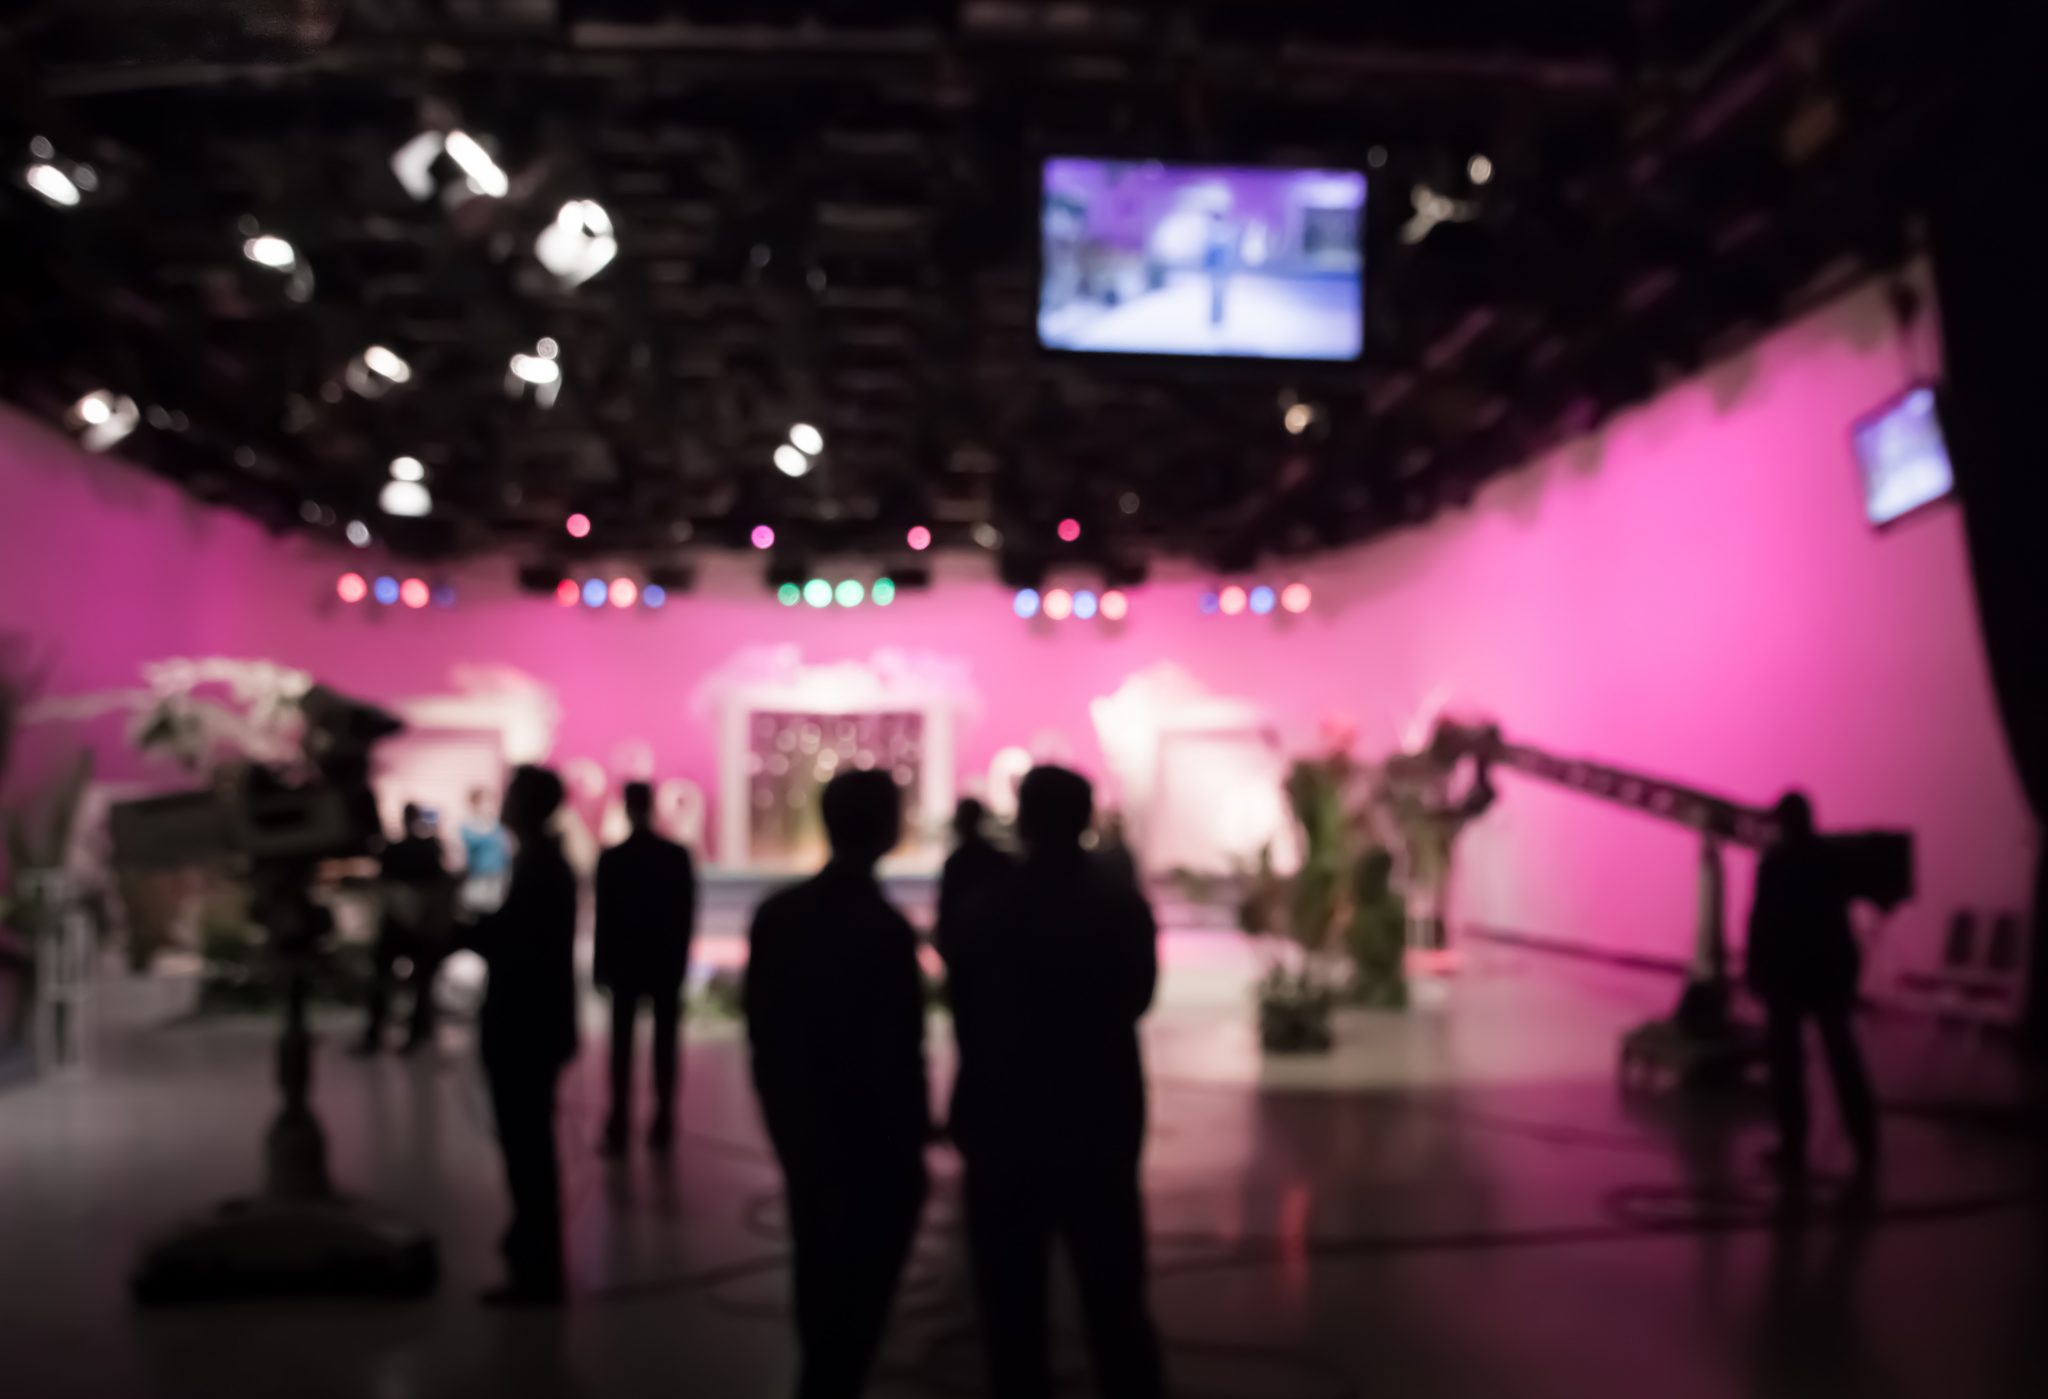 10 Signs That You Work in a TV Station